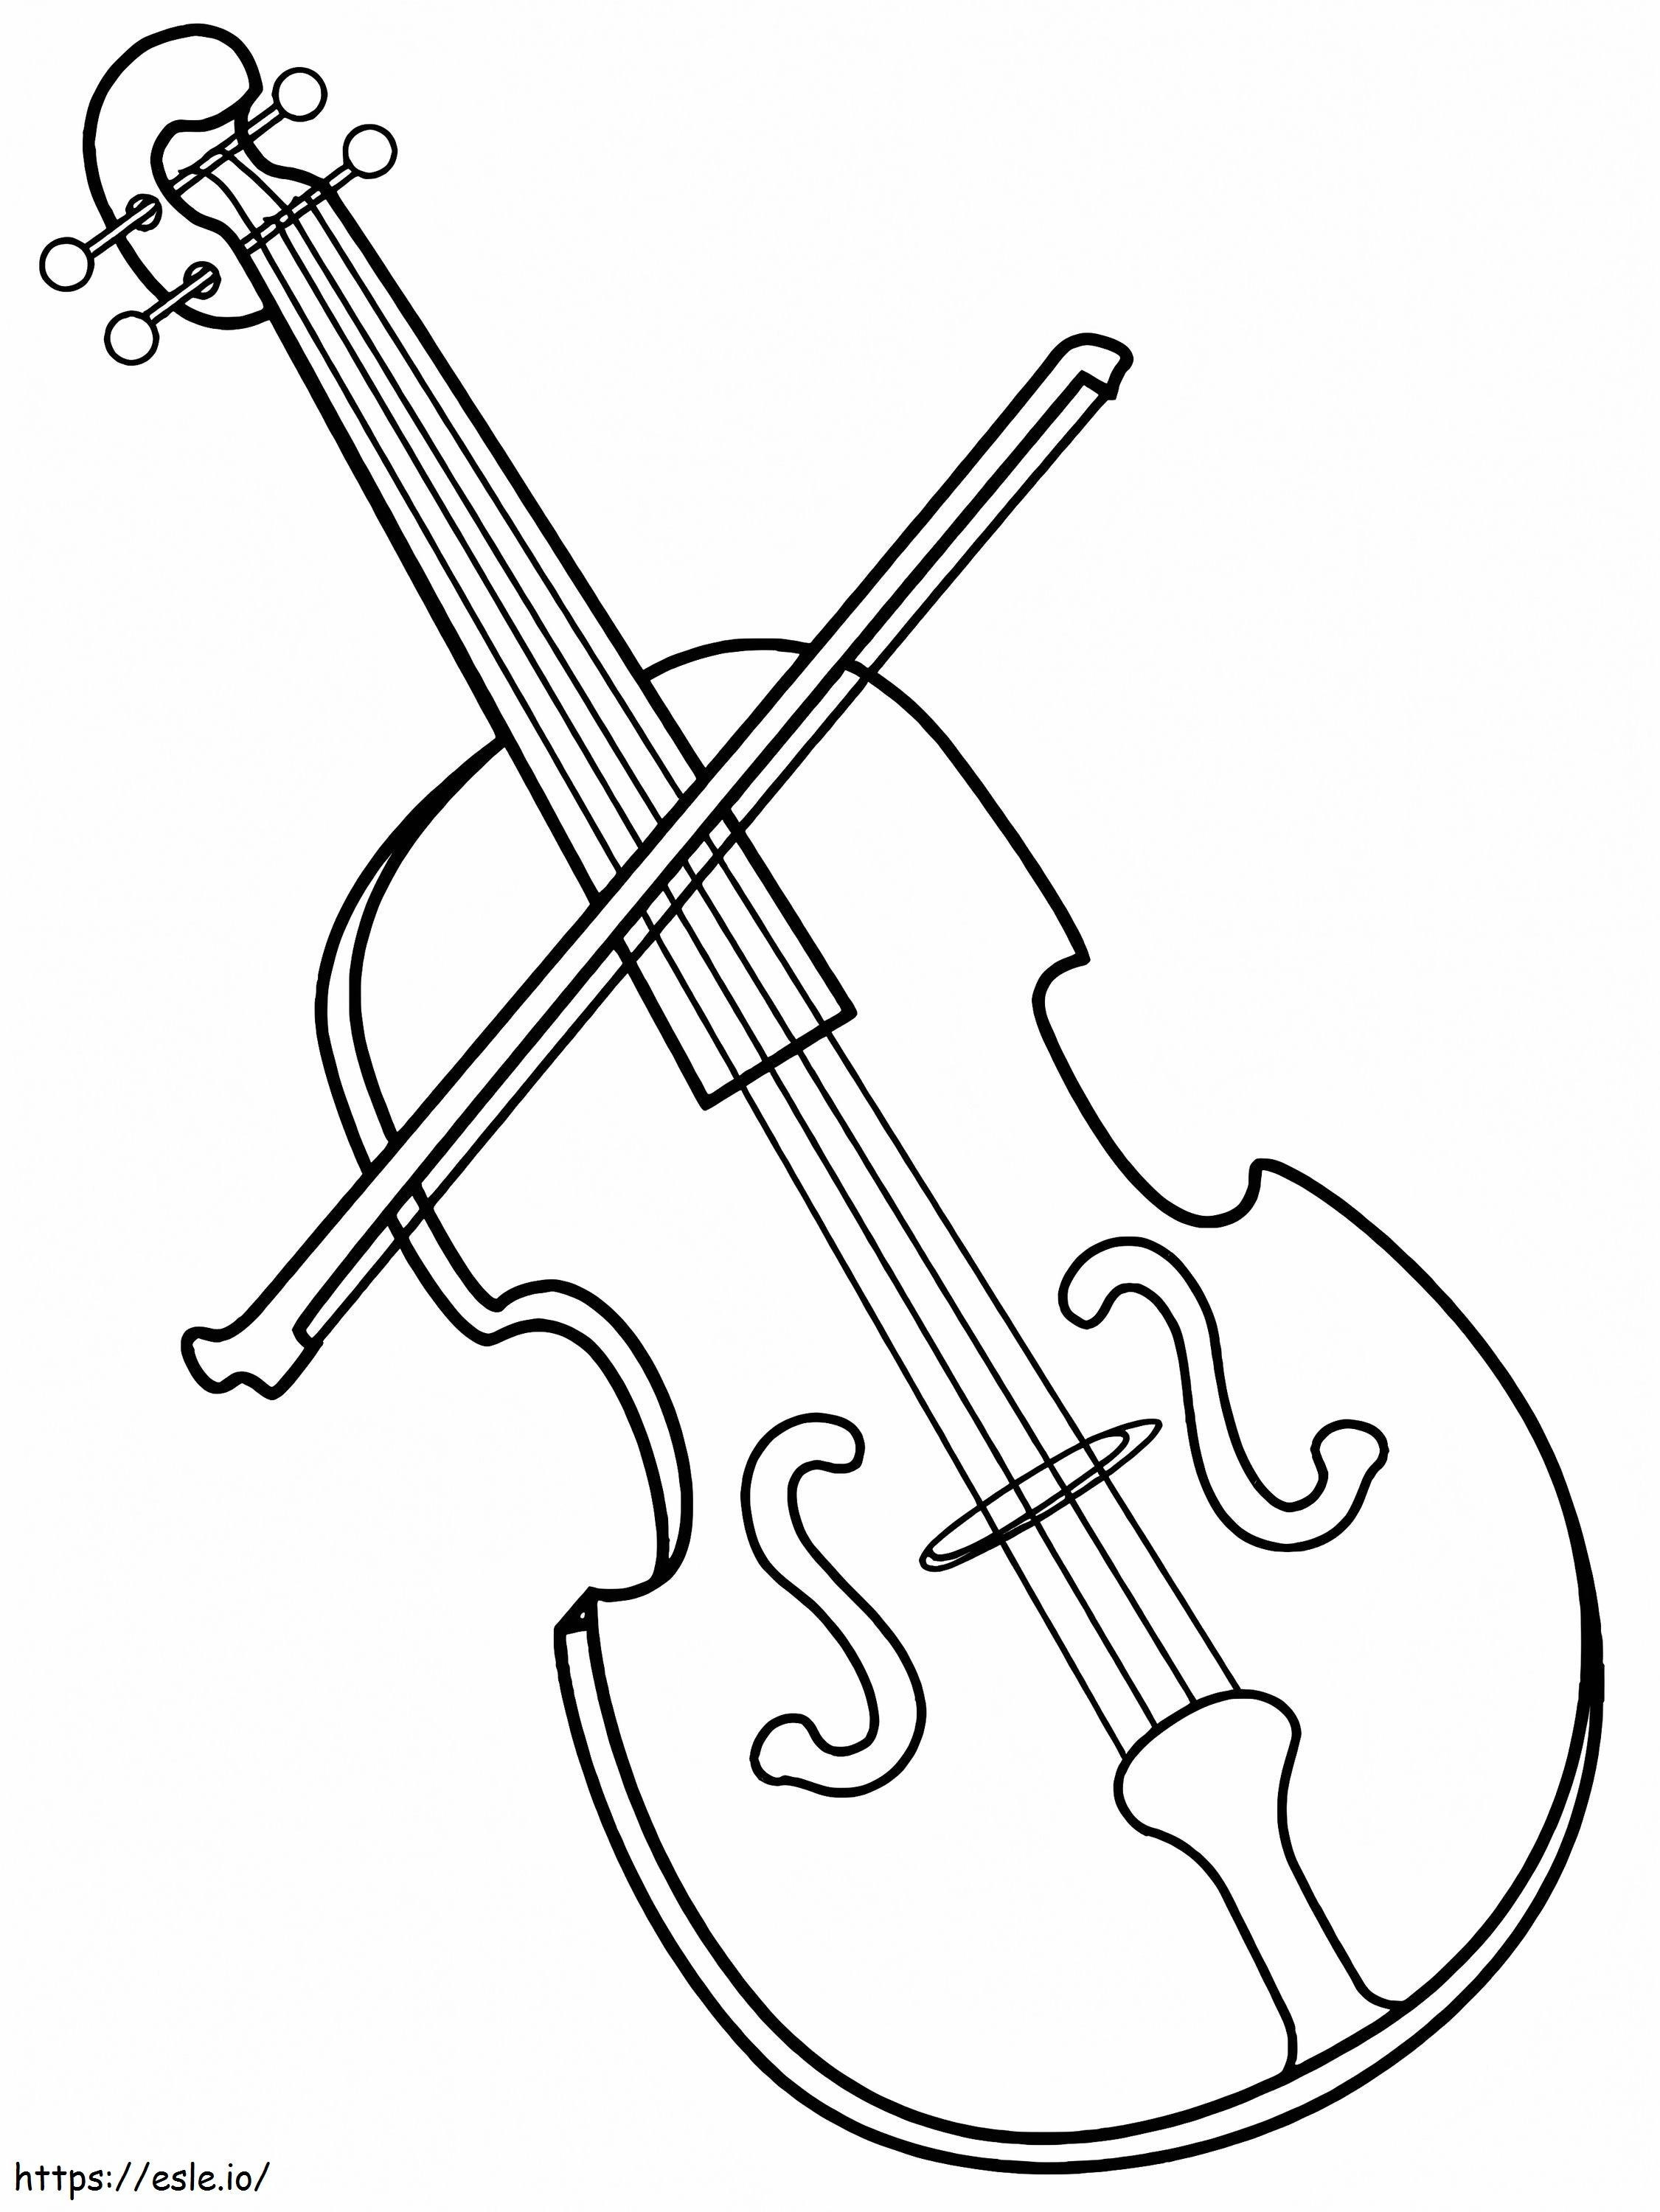 Cello To Color coloring page